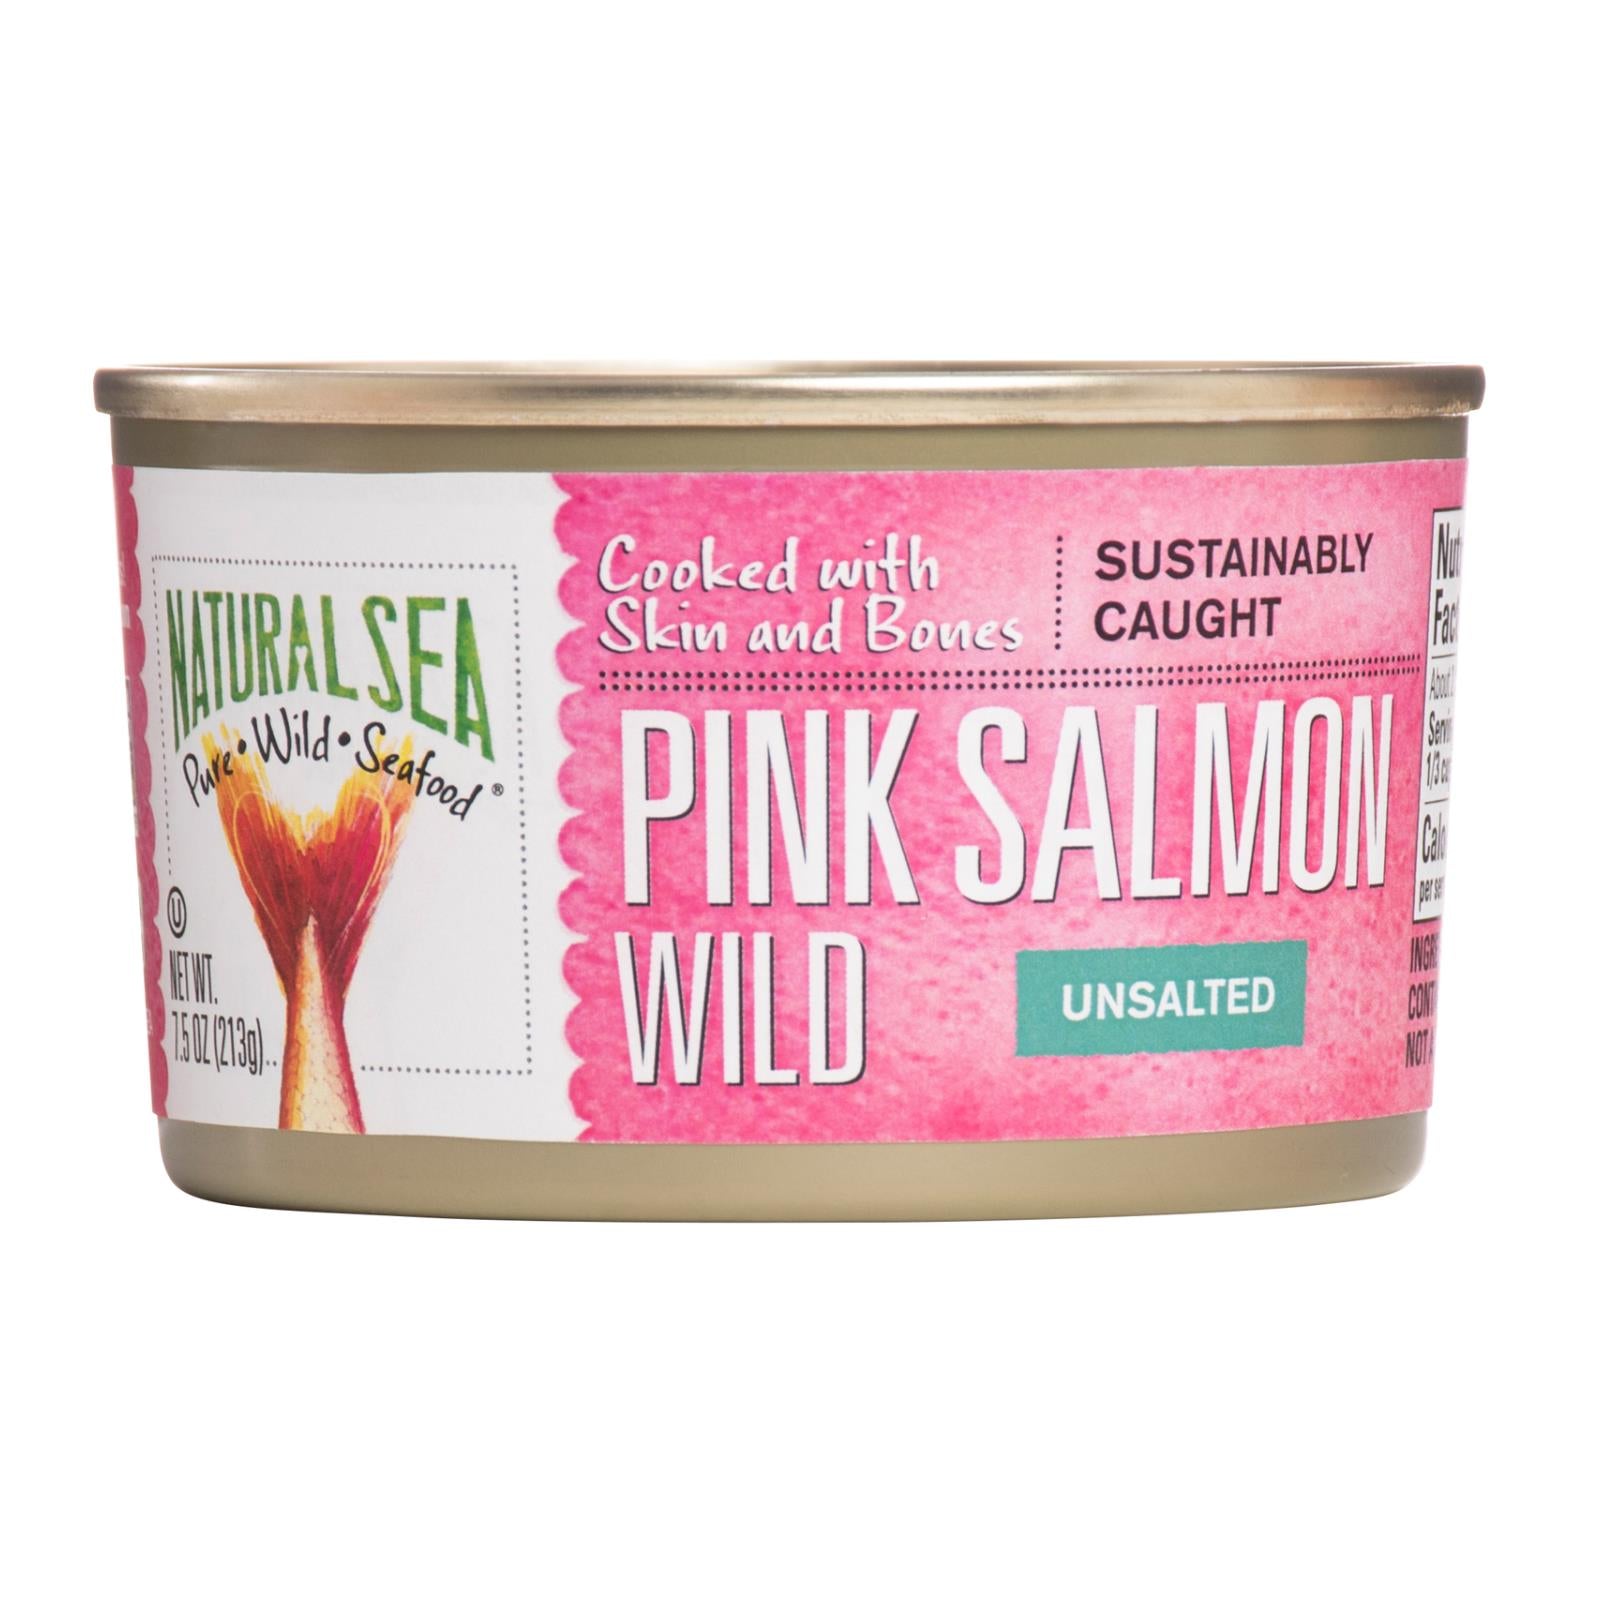 Natural Sea Wild Pink Salmon, Unsalted - 1 Each 1 - 7.5 Oz